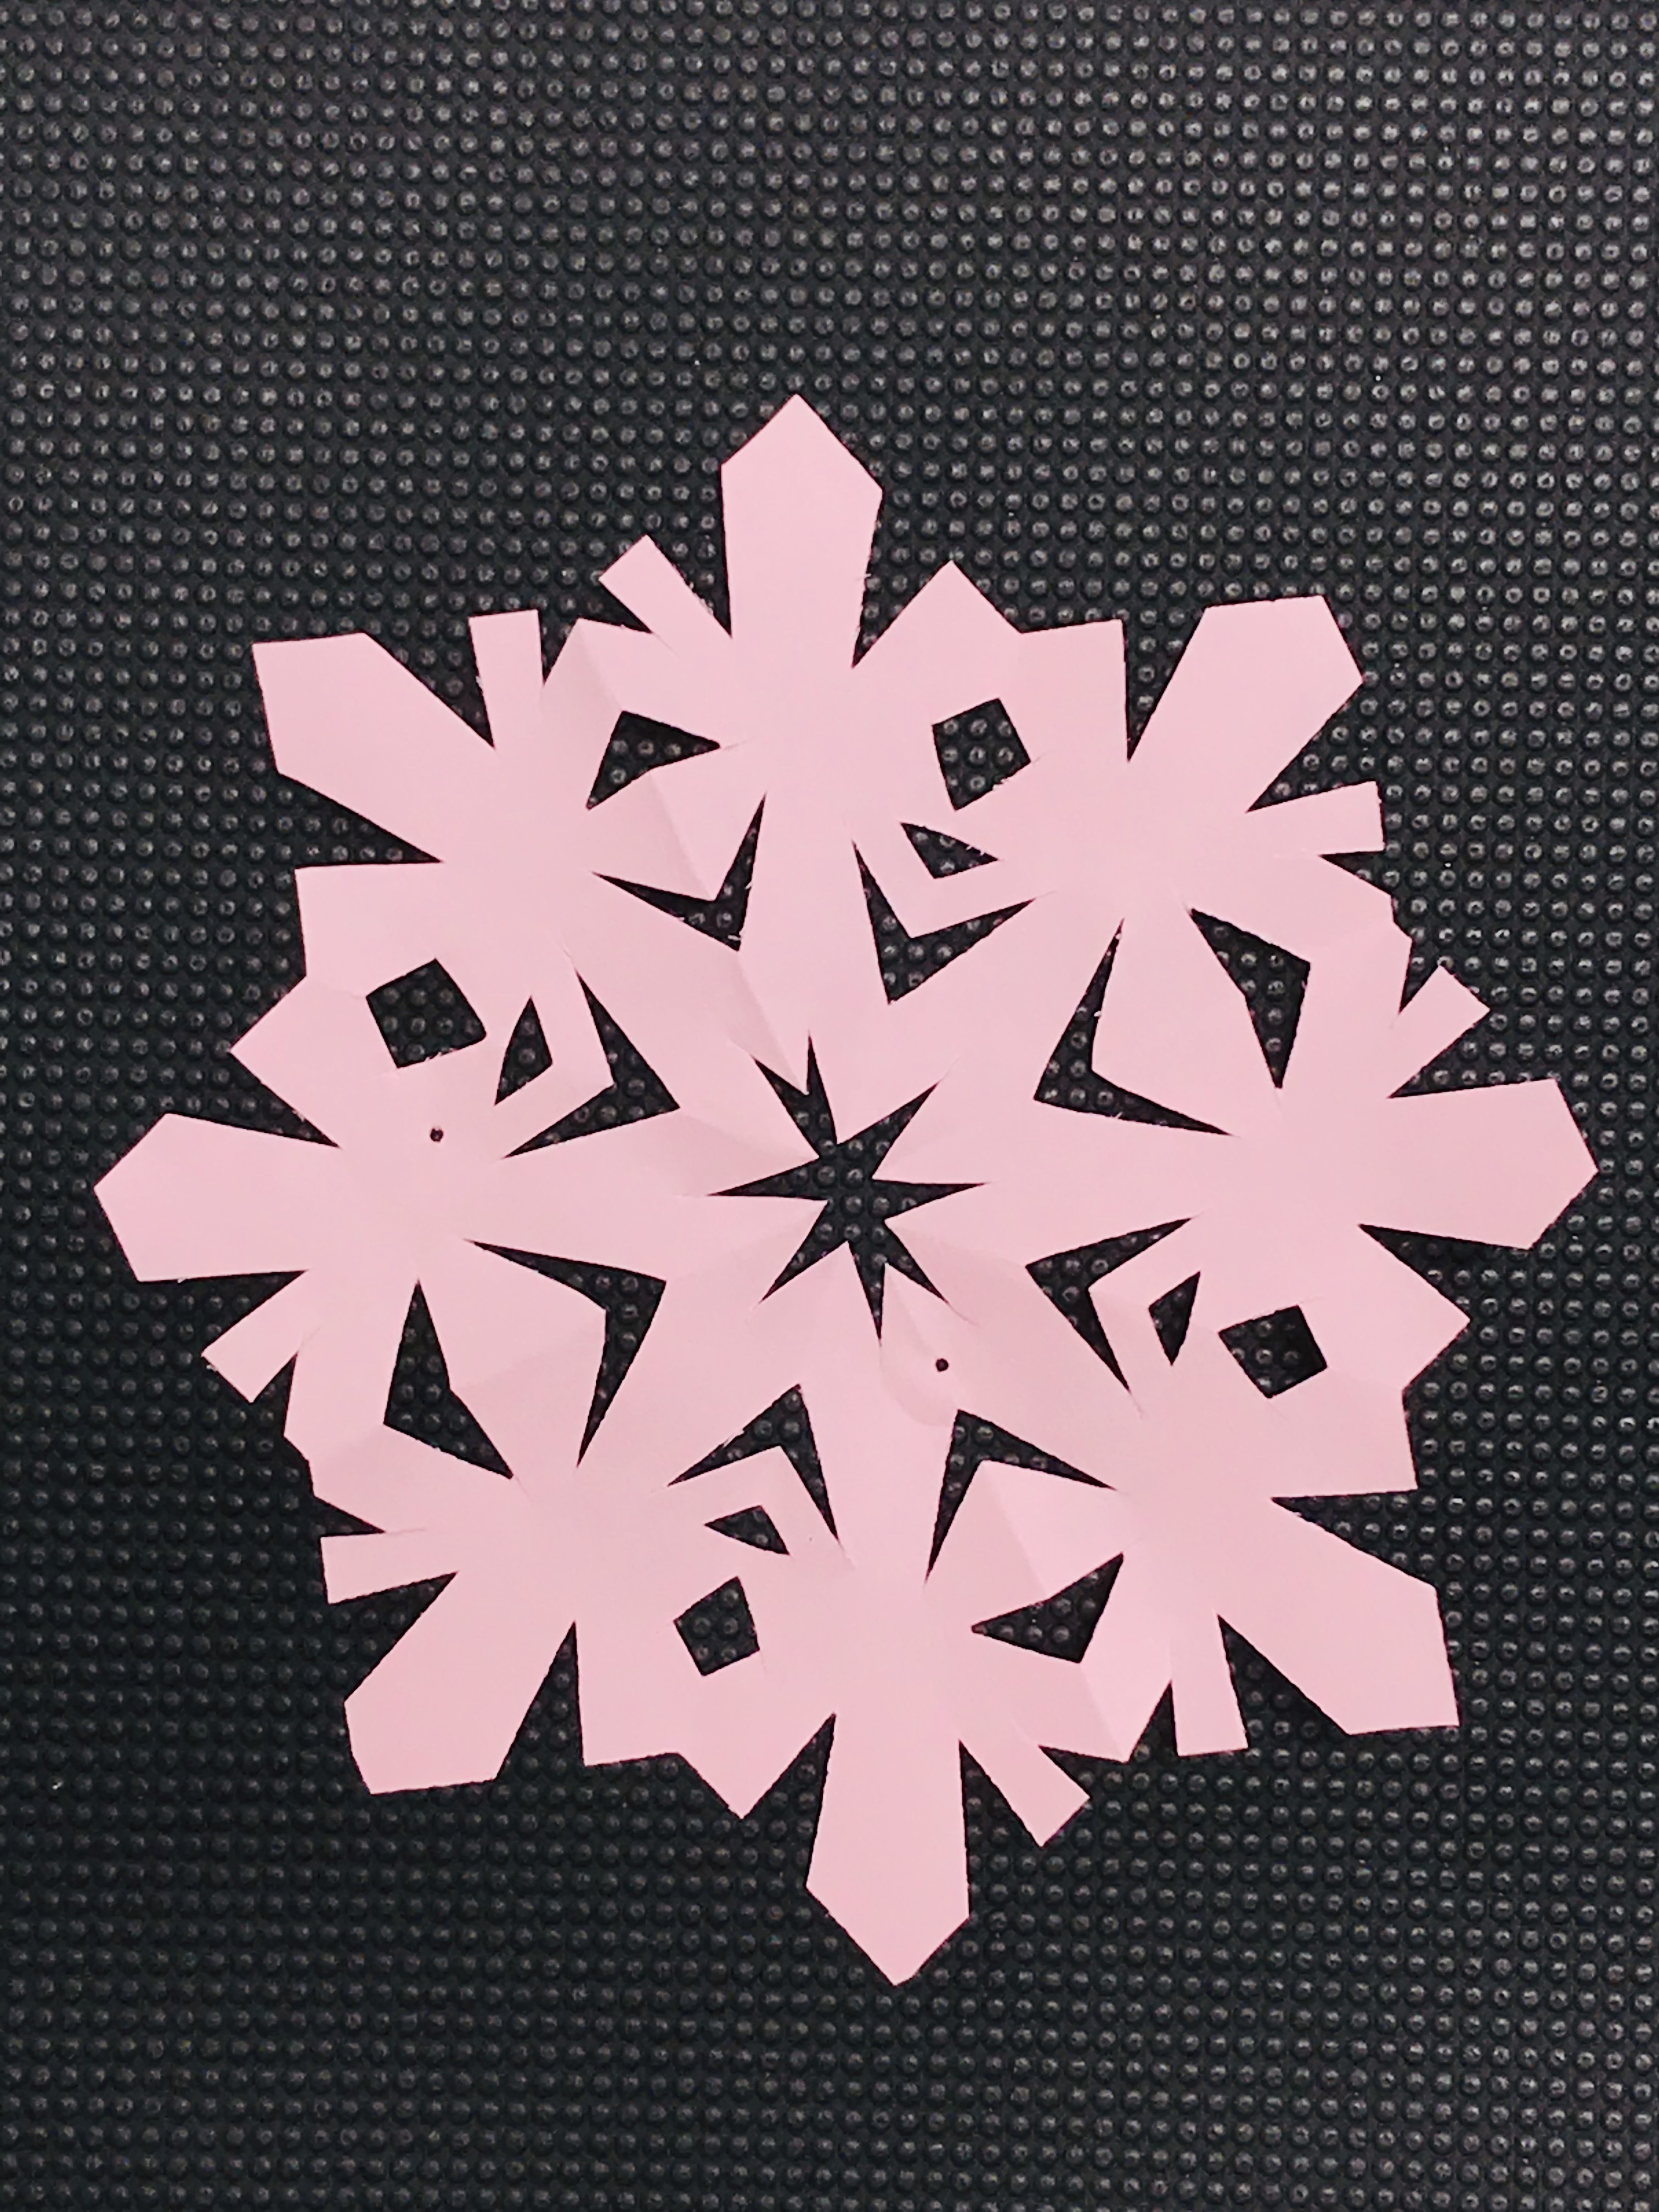 Paper cut out snowflake